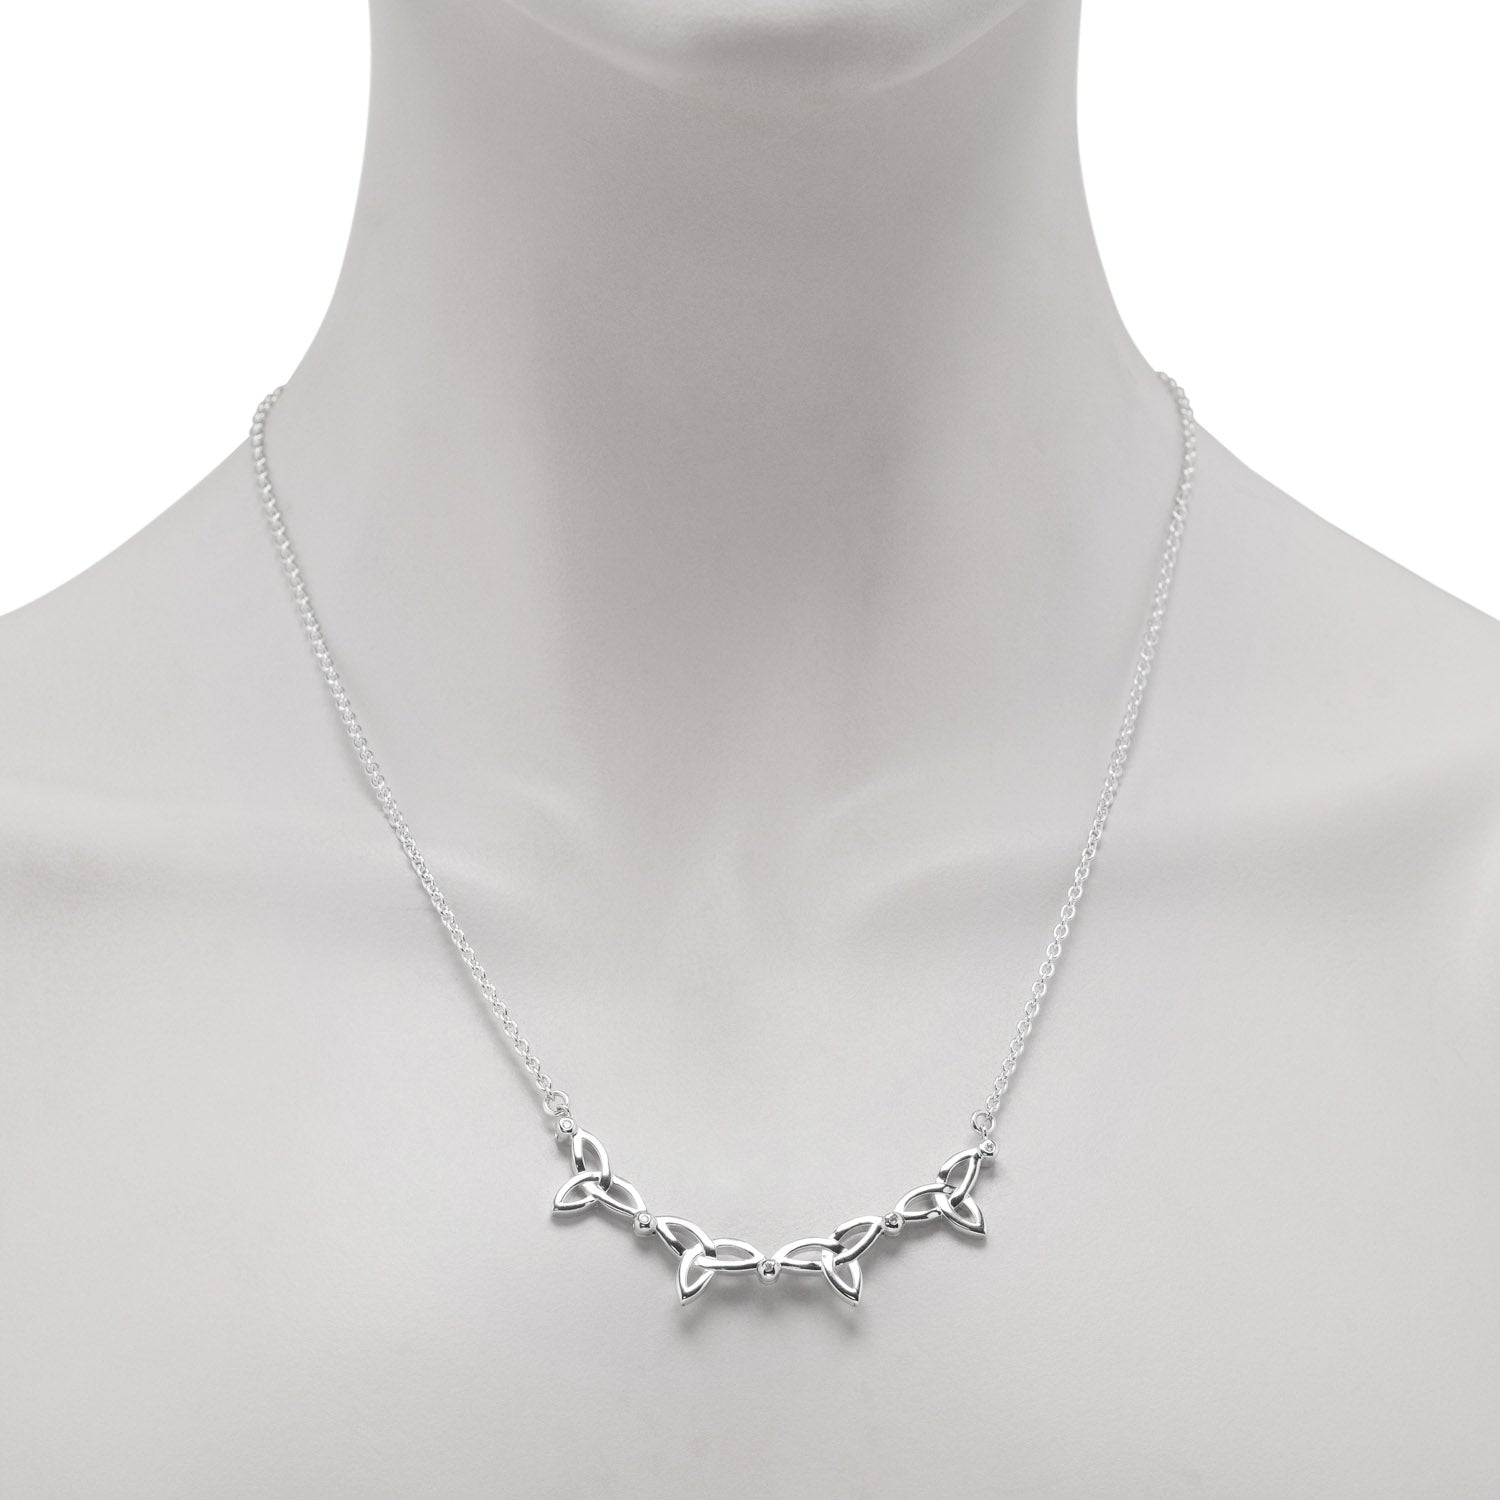 Keith Jack 2 in 1 Synergy Necklace in Sterling Silver with Diamonds